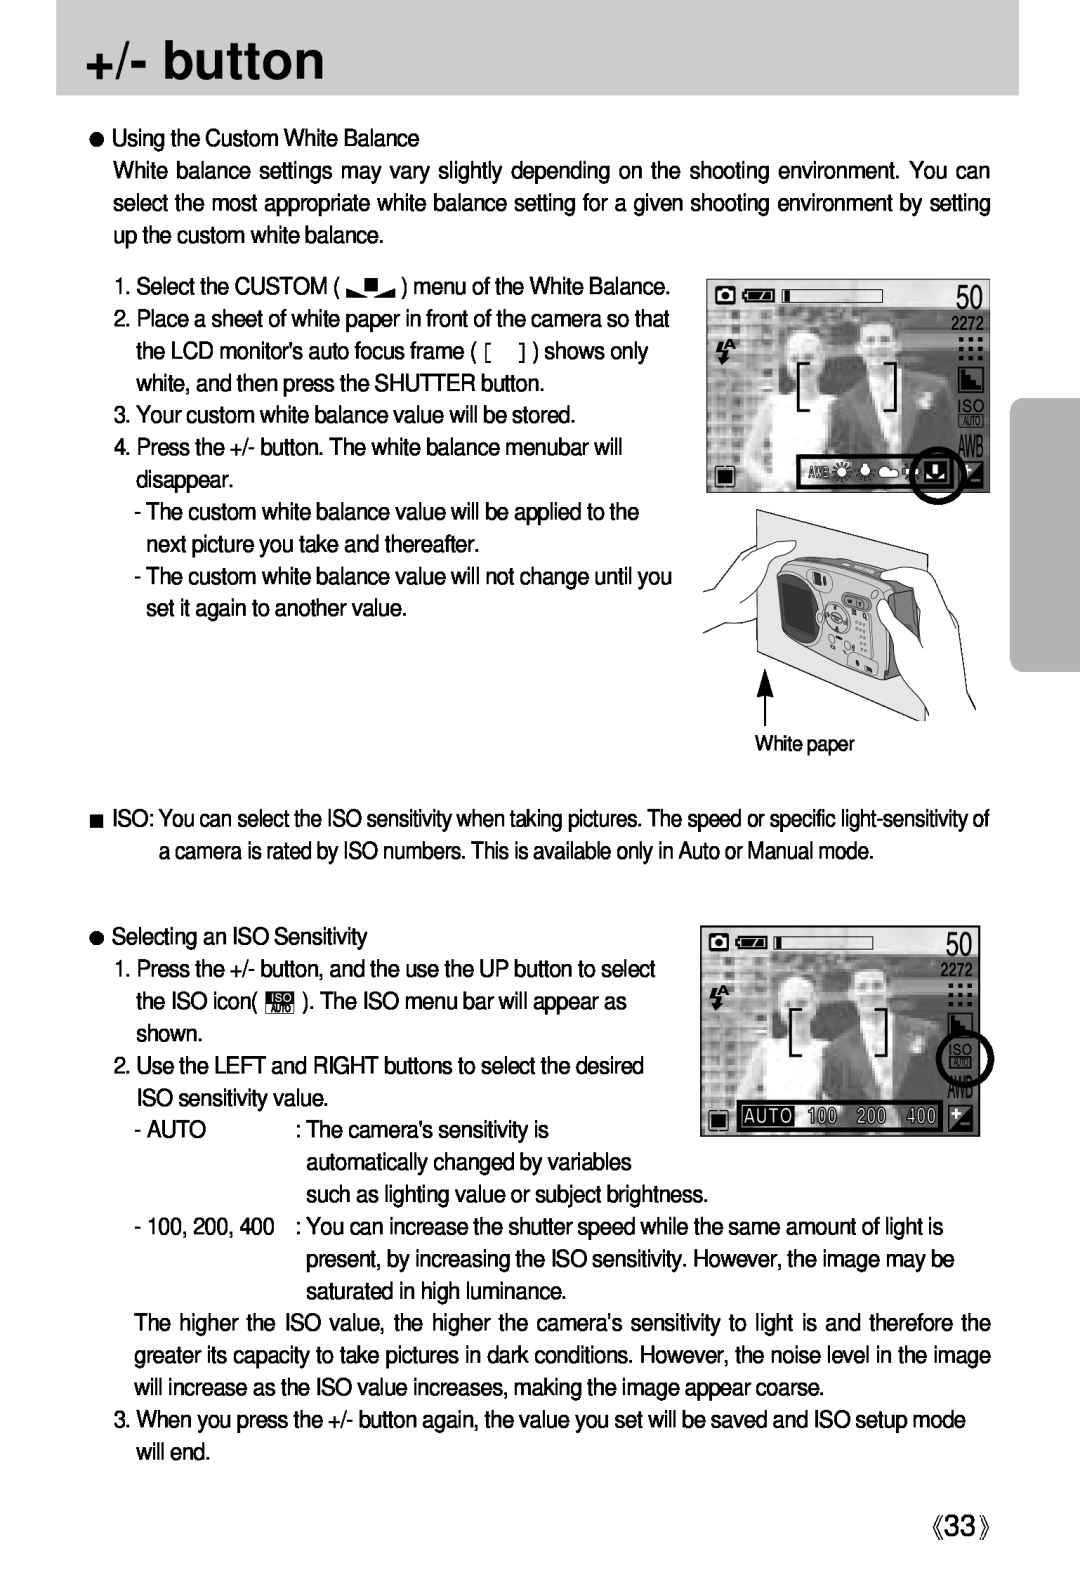 Samsung Digimax U-CA user manual White paper, Press the +/- button, and the use the UP button to select 